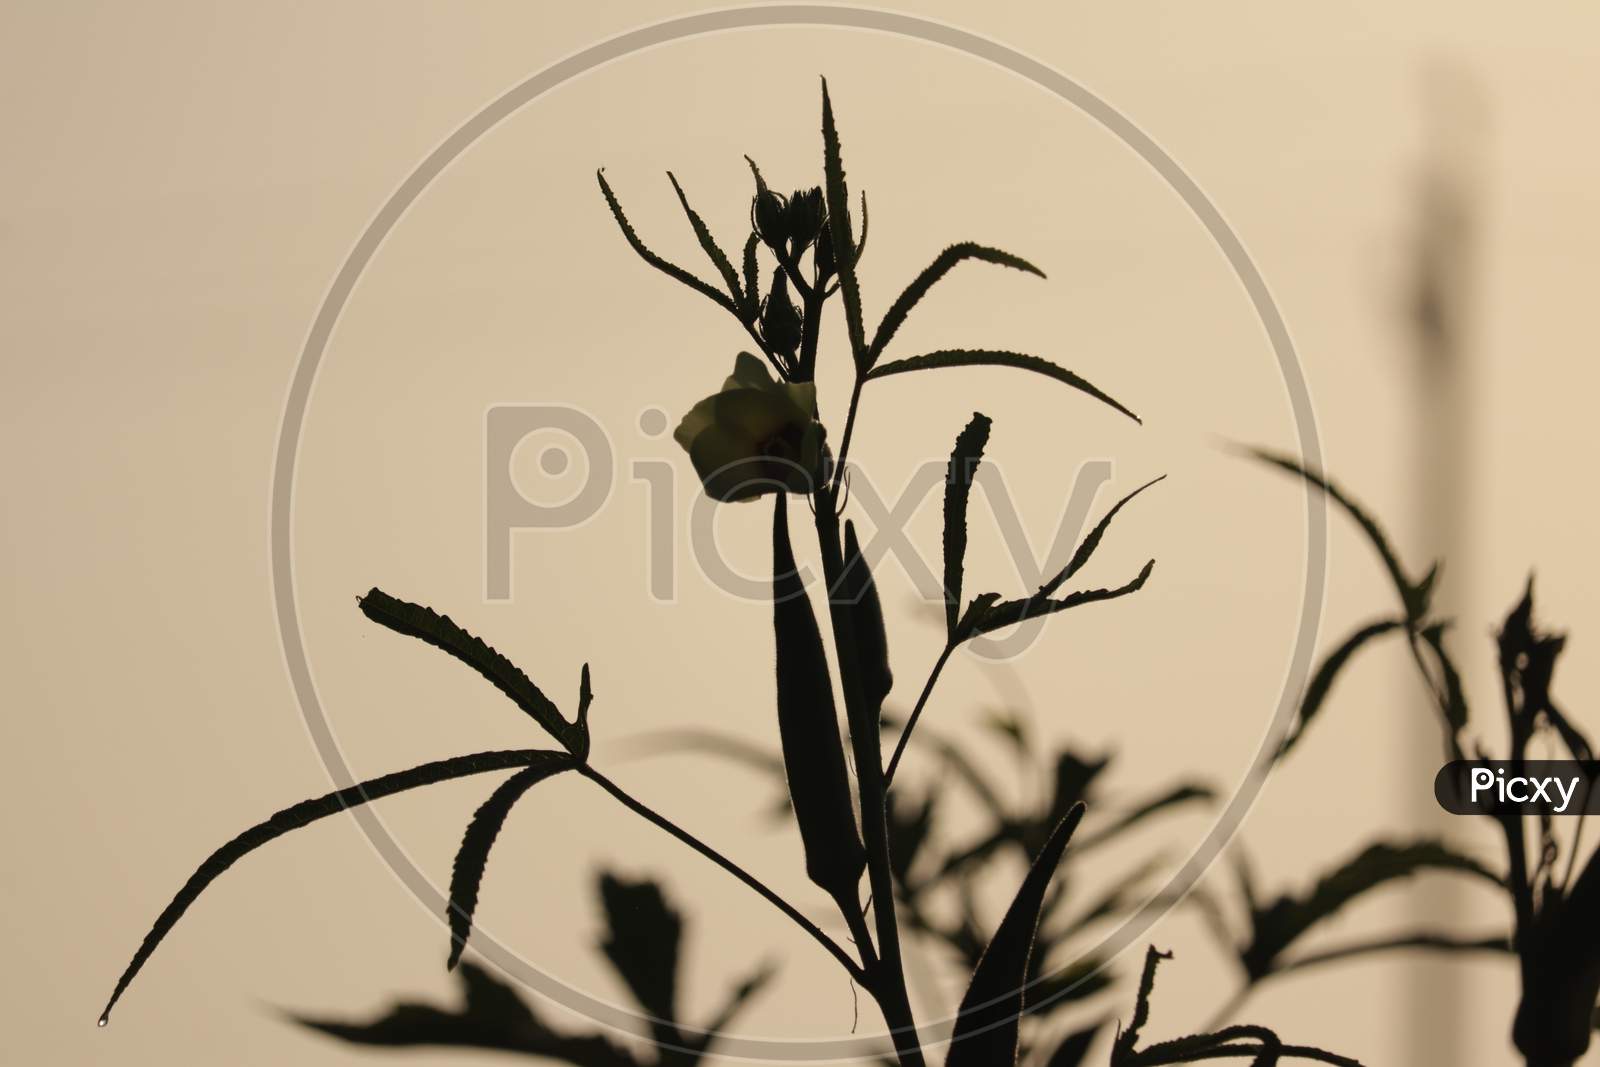 Nature Concept With Sunset Warm Light, Agriculture Industry, Lady Finger Farming,Bhindi Plants,Okra Crop In Fruiting Stage,Lady Finger Farming, Selective Focus Without Noise